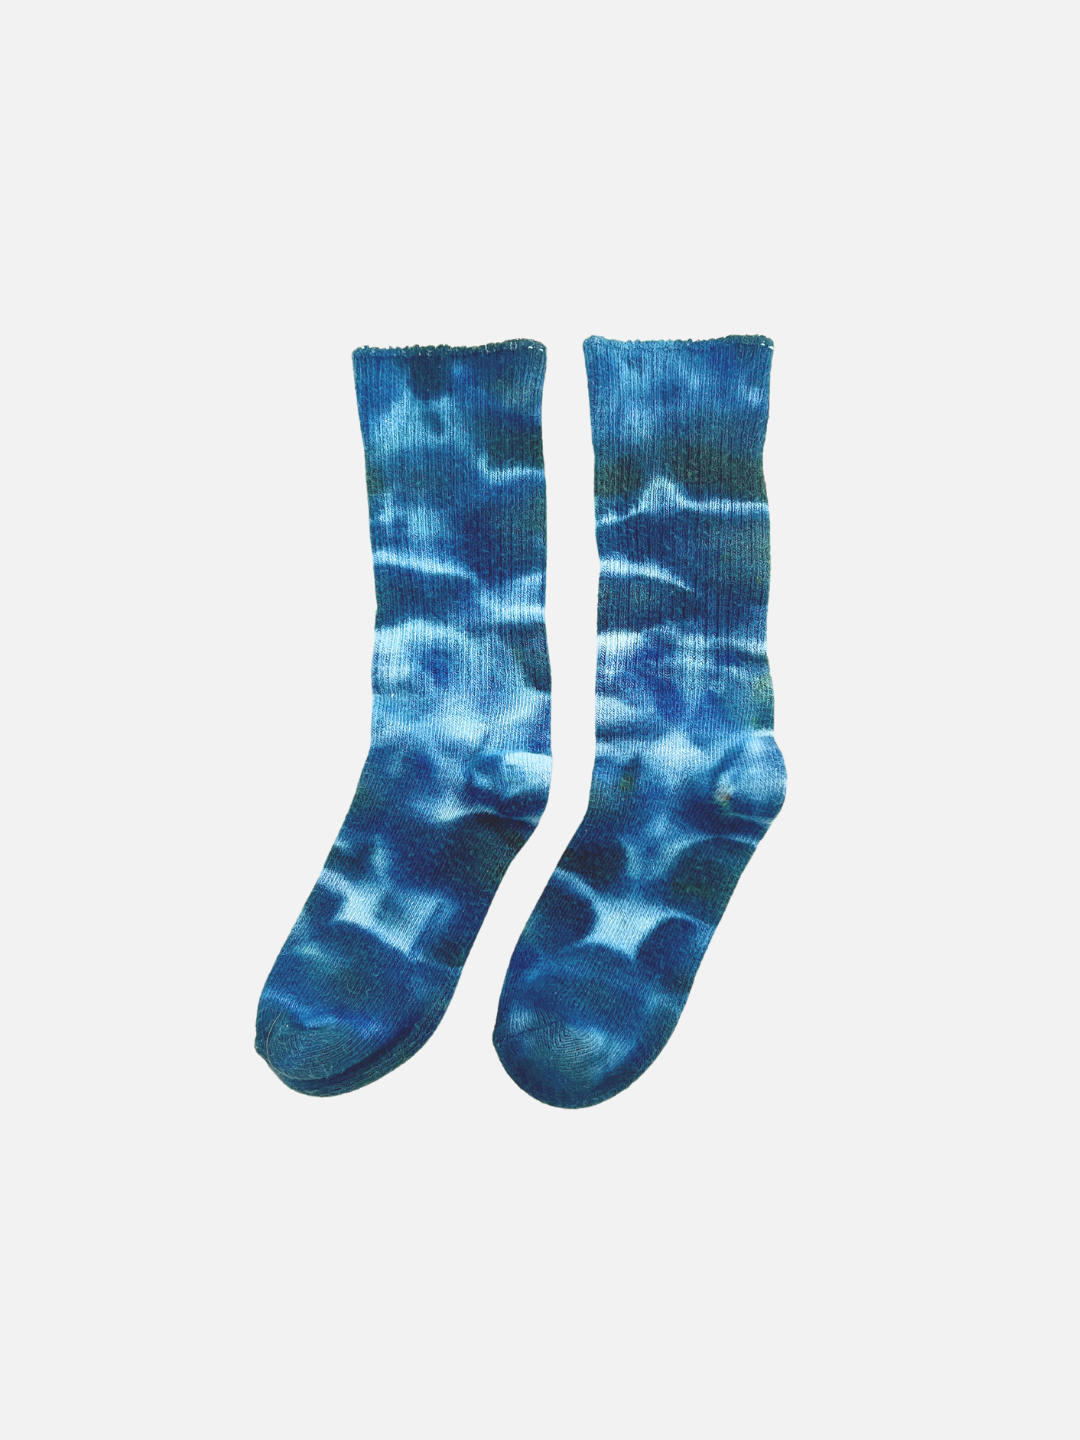 Blue Lagoon | A pair of kids' ankle socks in dappled shades of blue and green